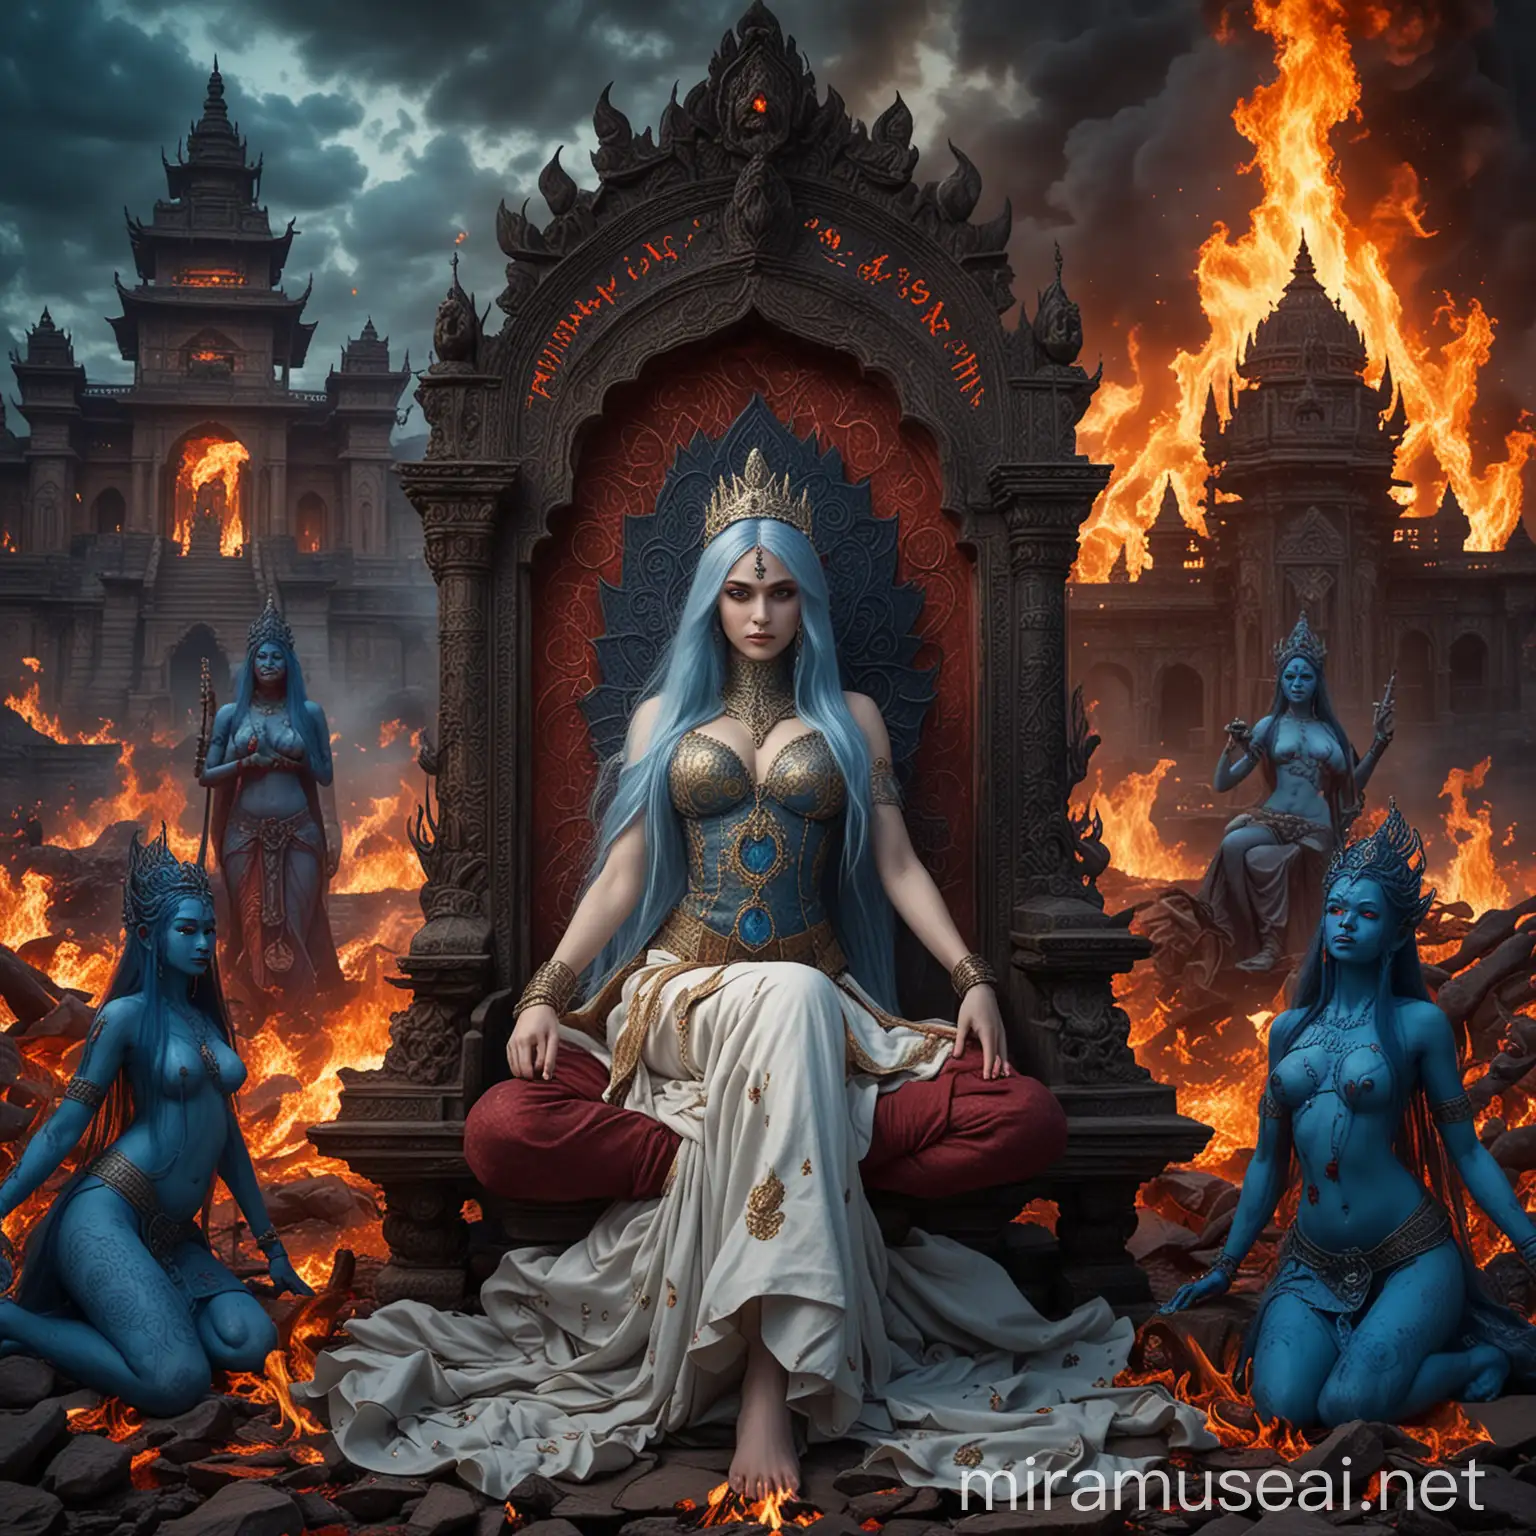 Majestic Empress Surrounded by Hindu Demon Goddesses and Fire in Dark Palace